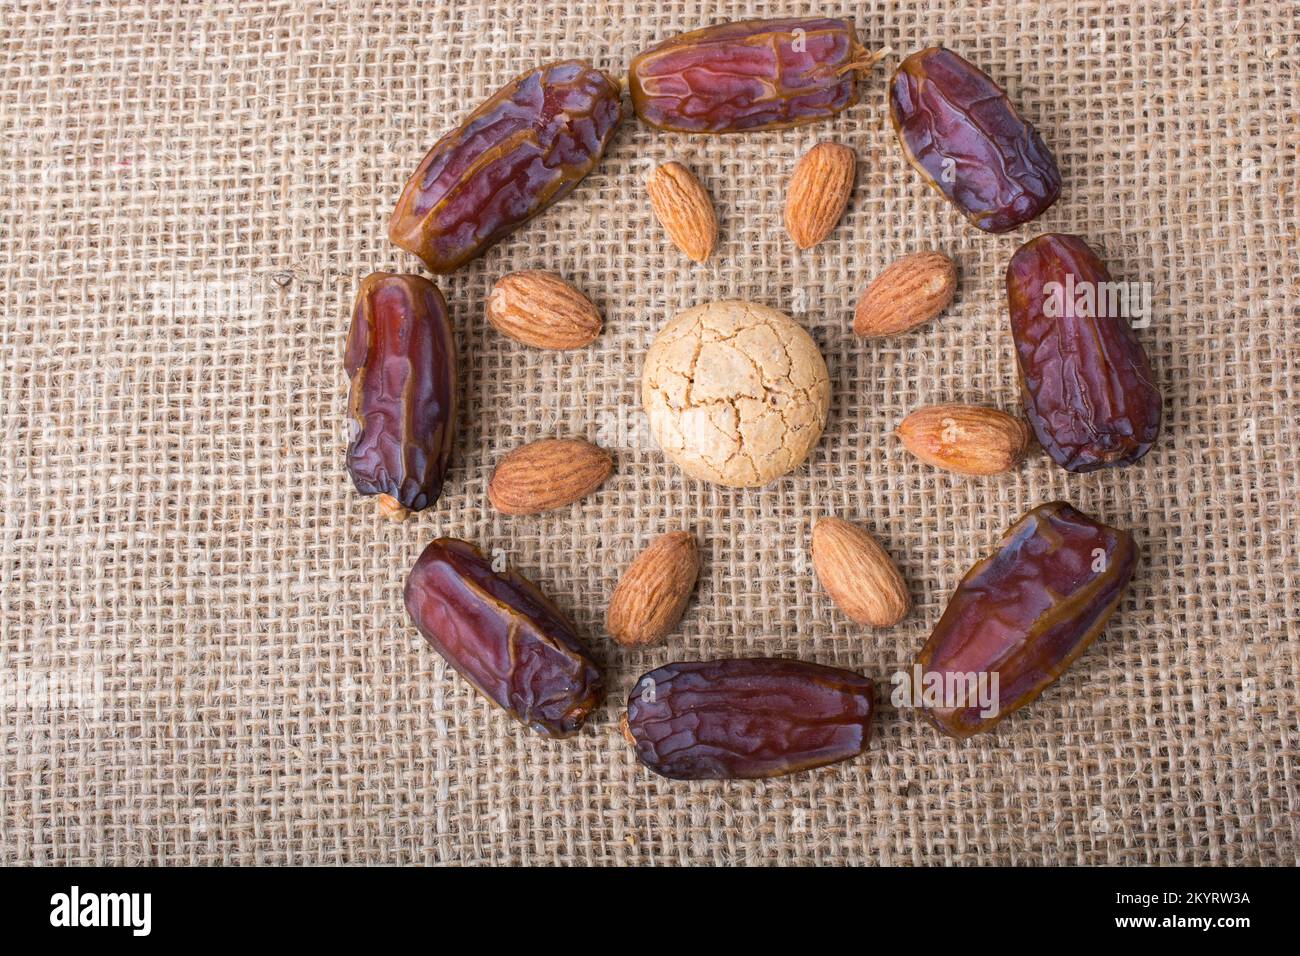 Date fruit, almond and cookies  form the sun shape on canvas Stock Photo